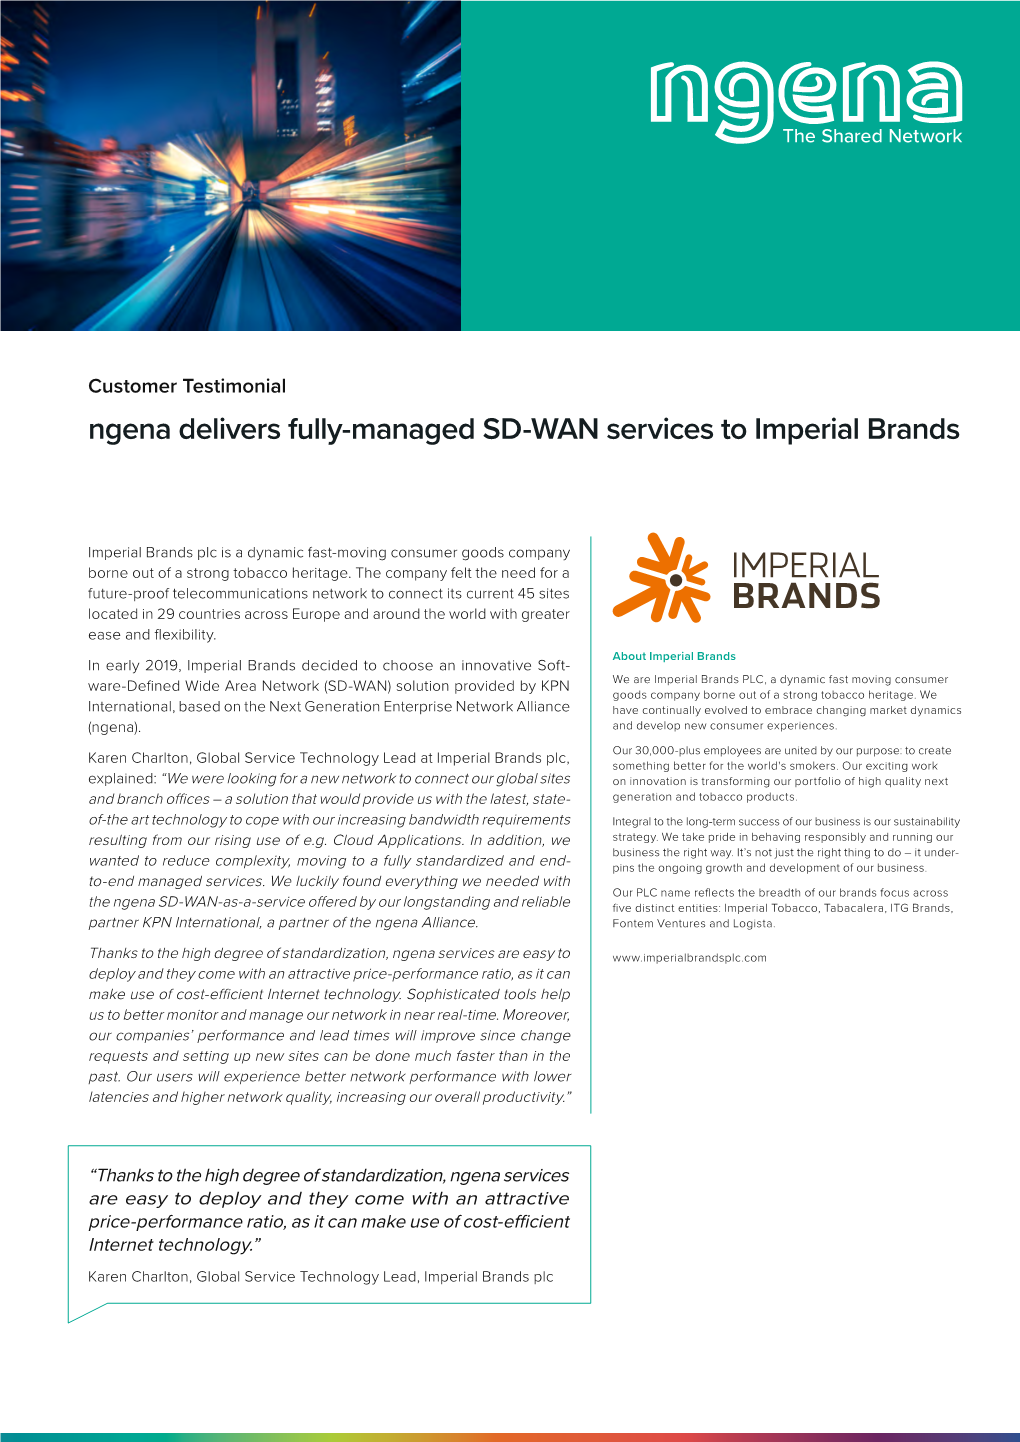 Ngena Delivers Fully-Managed SD-WAN Services to Imperial Brands